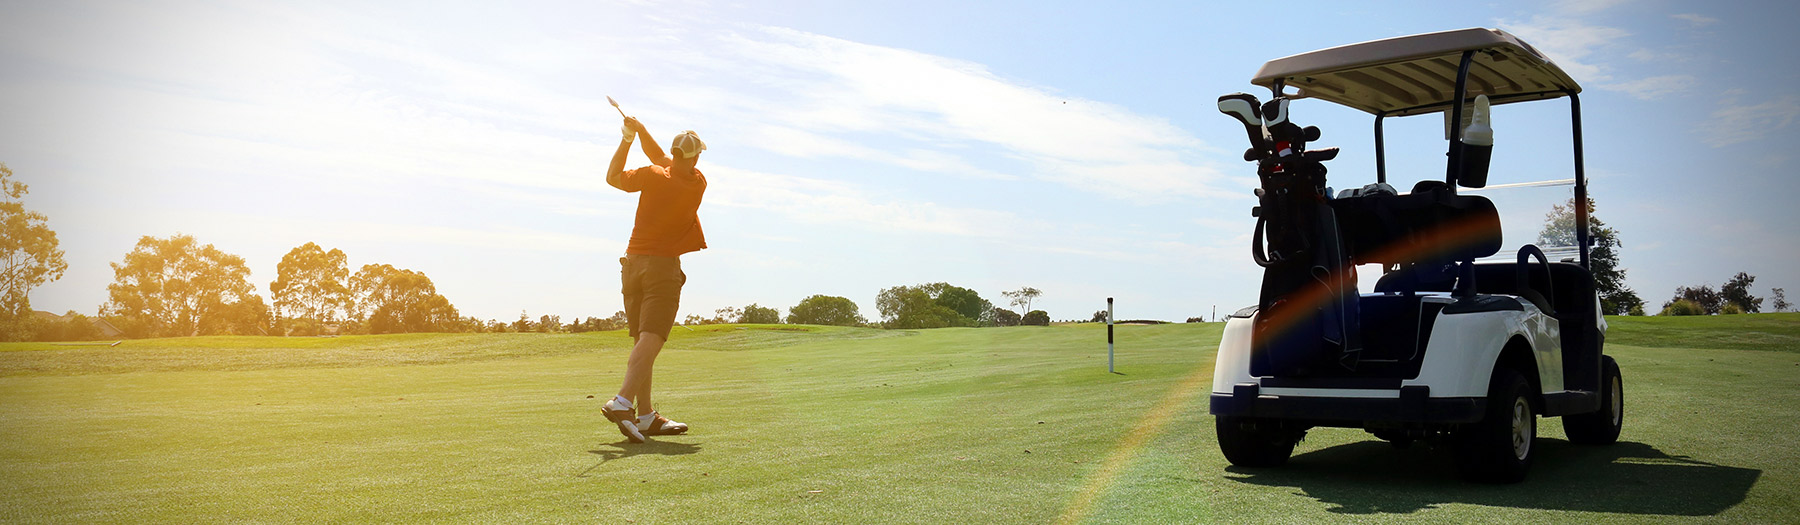 Tips for Myrtle Beach Golf in the Summer